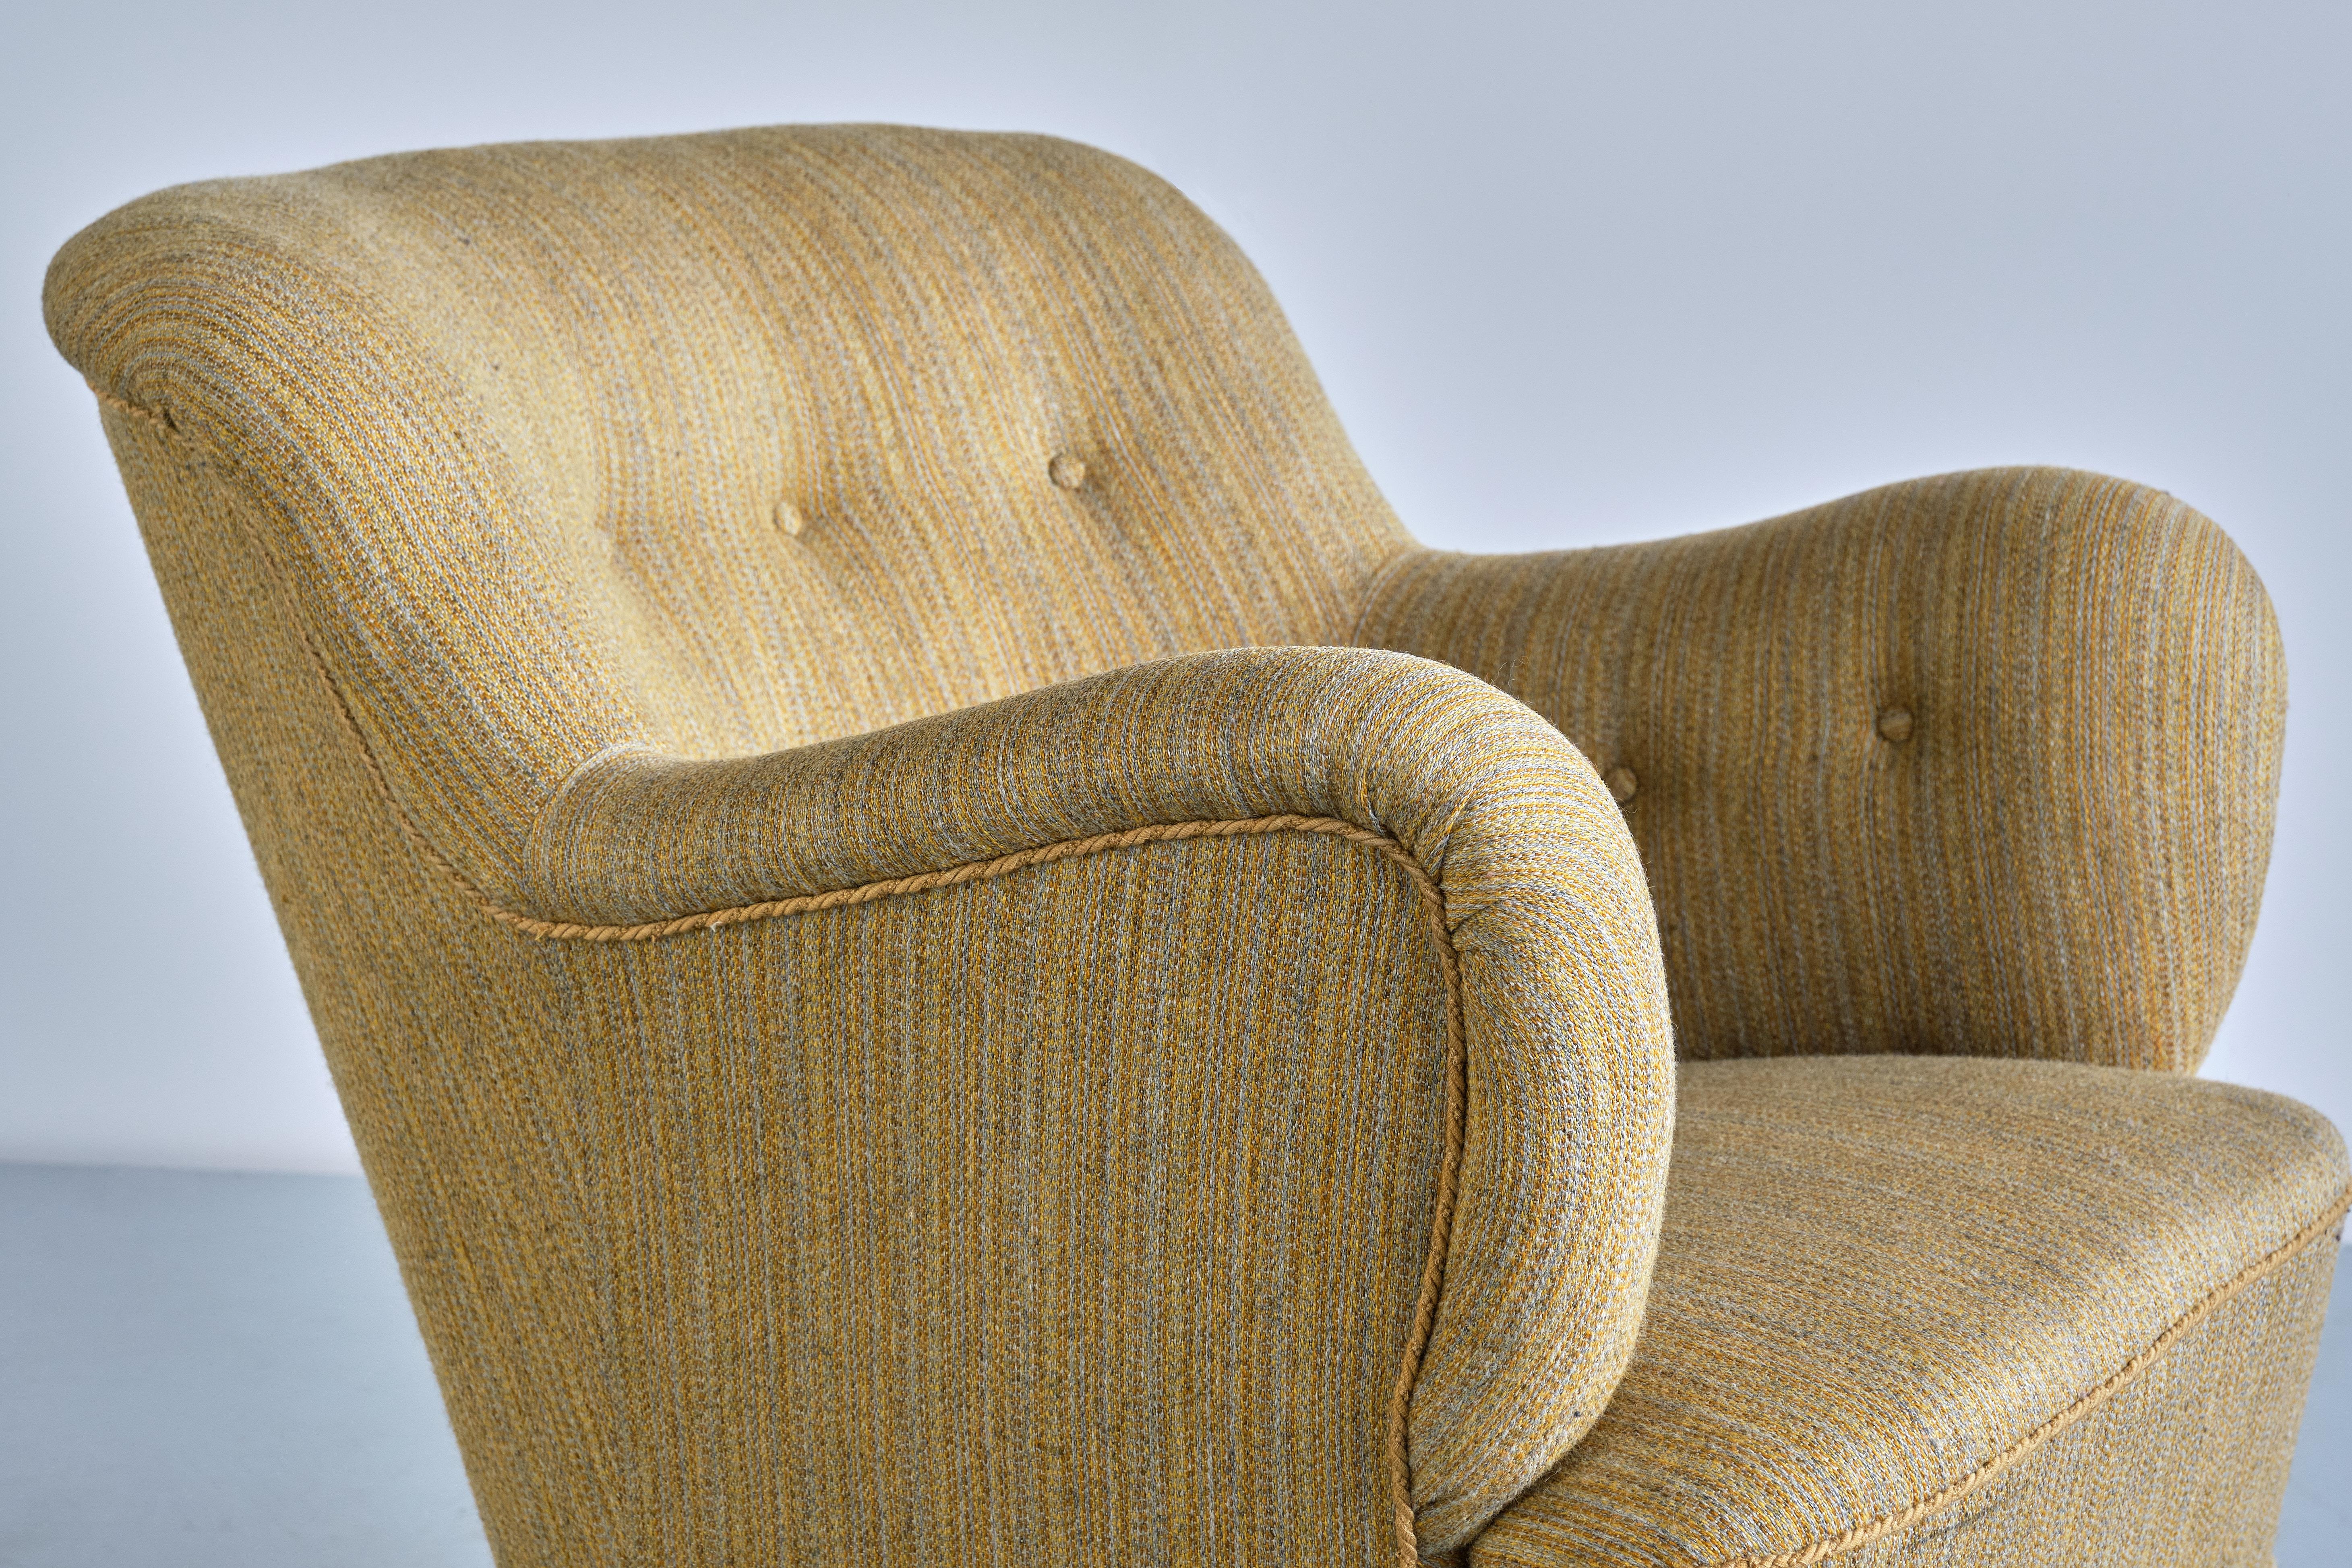 Sculptural Pair of Gustav Axel Berg Armchairs in Beech and Wool, Sweden, 1940s For Sale 7